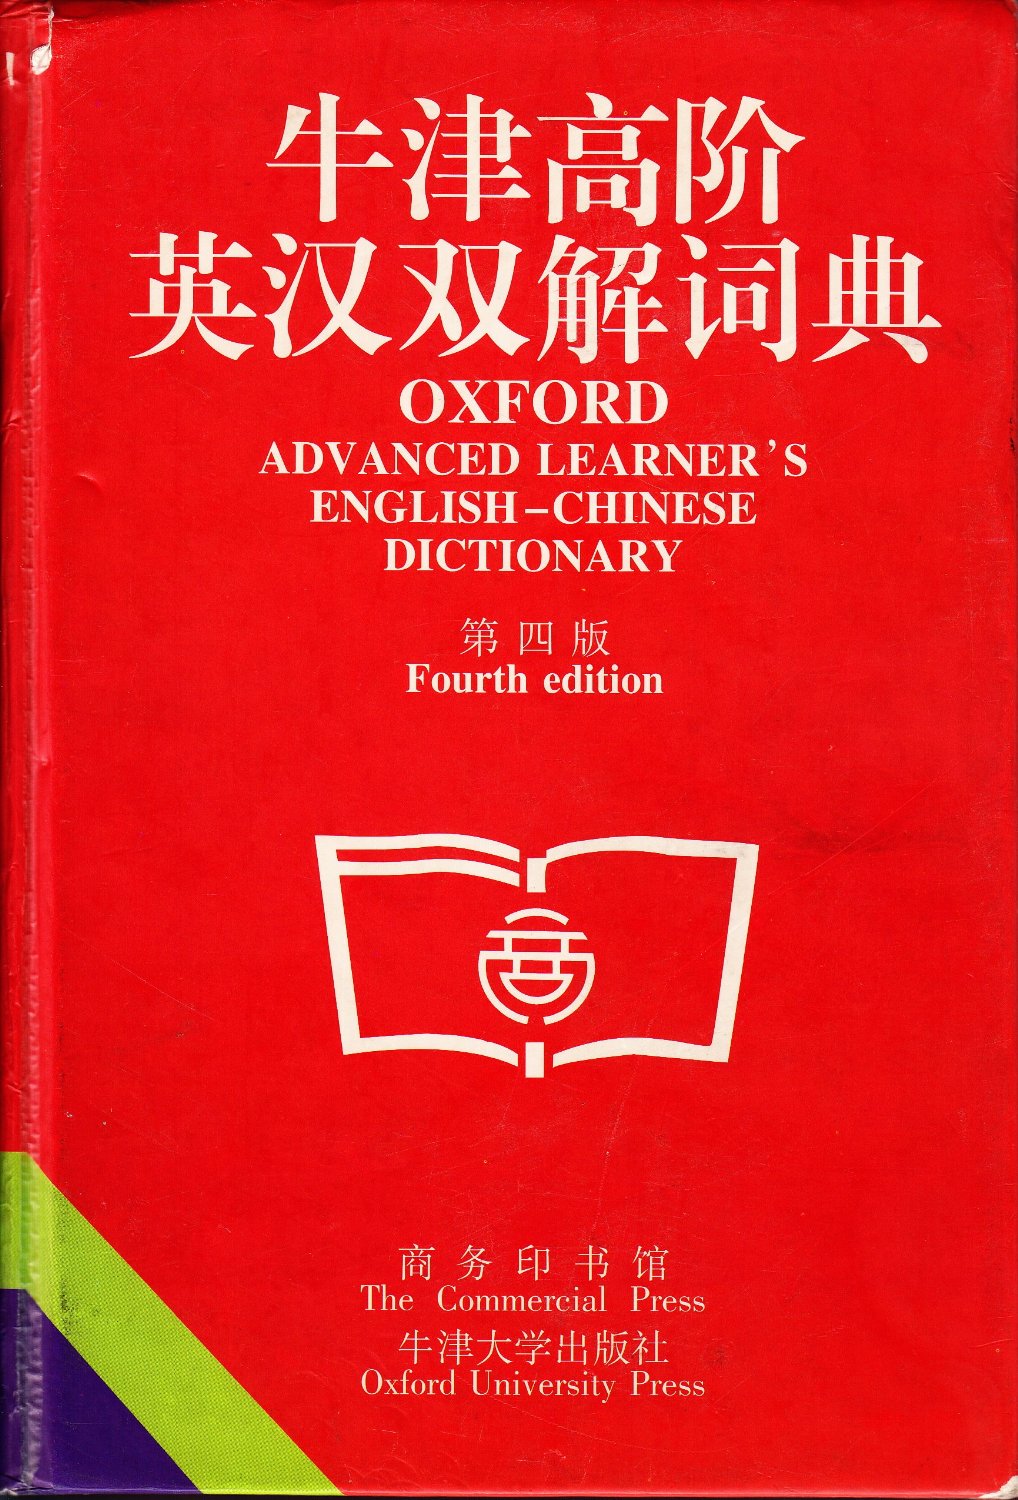 oxford dictionary advanced learner online